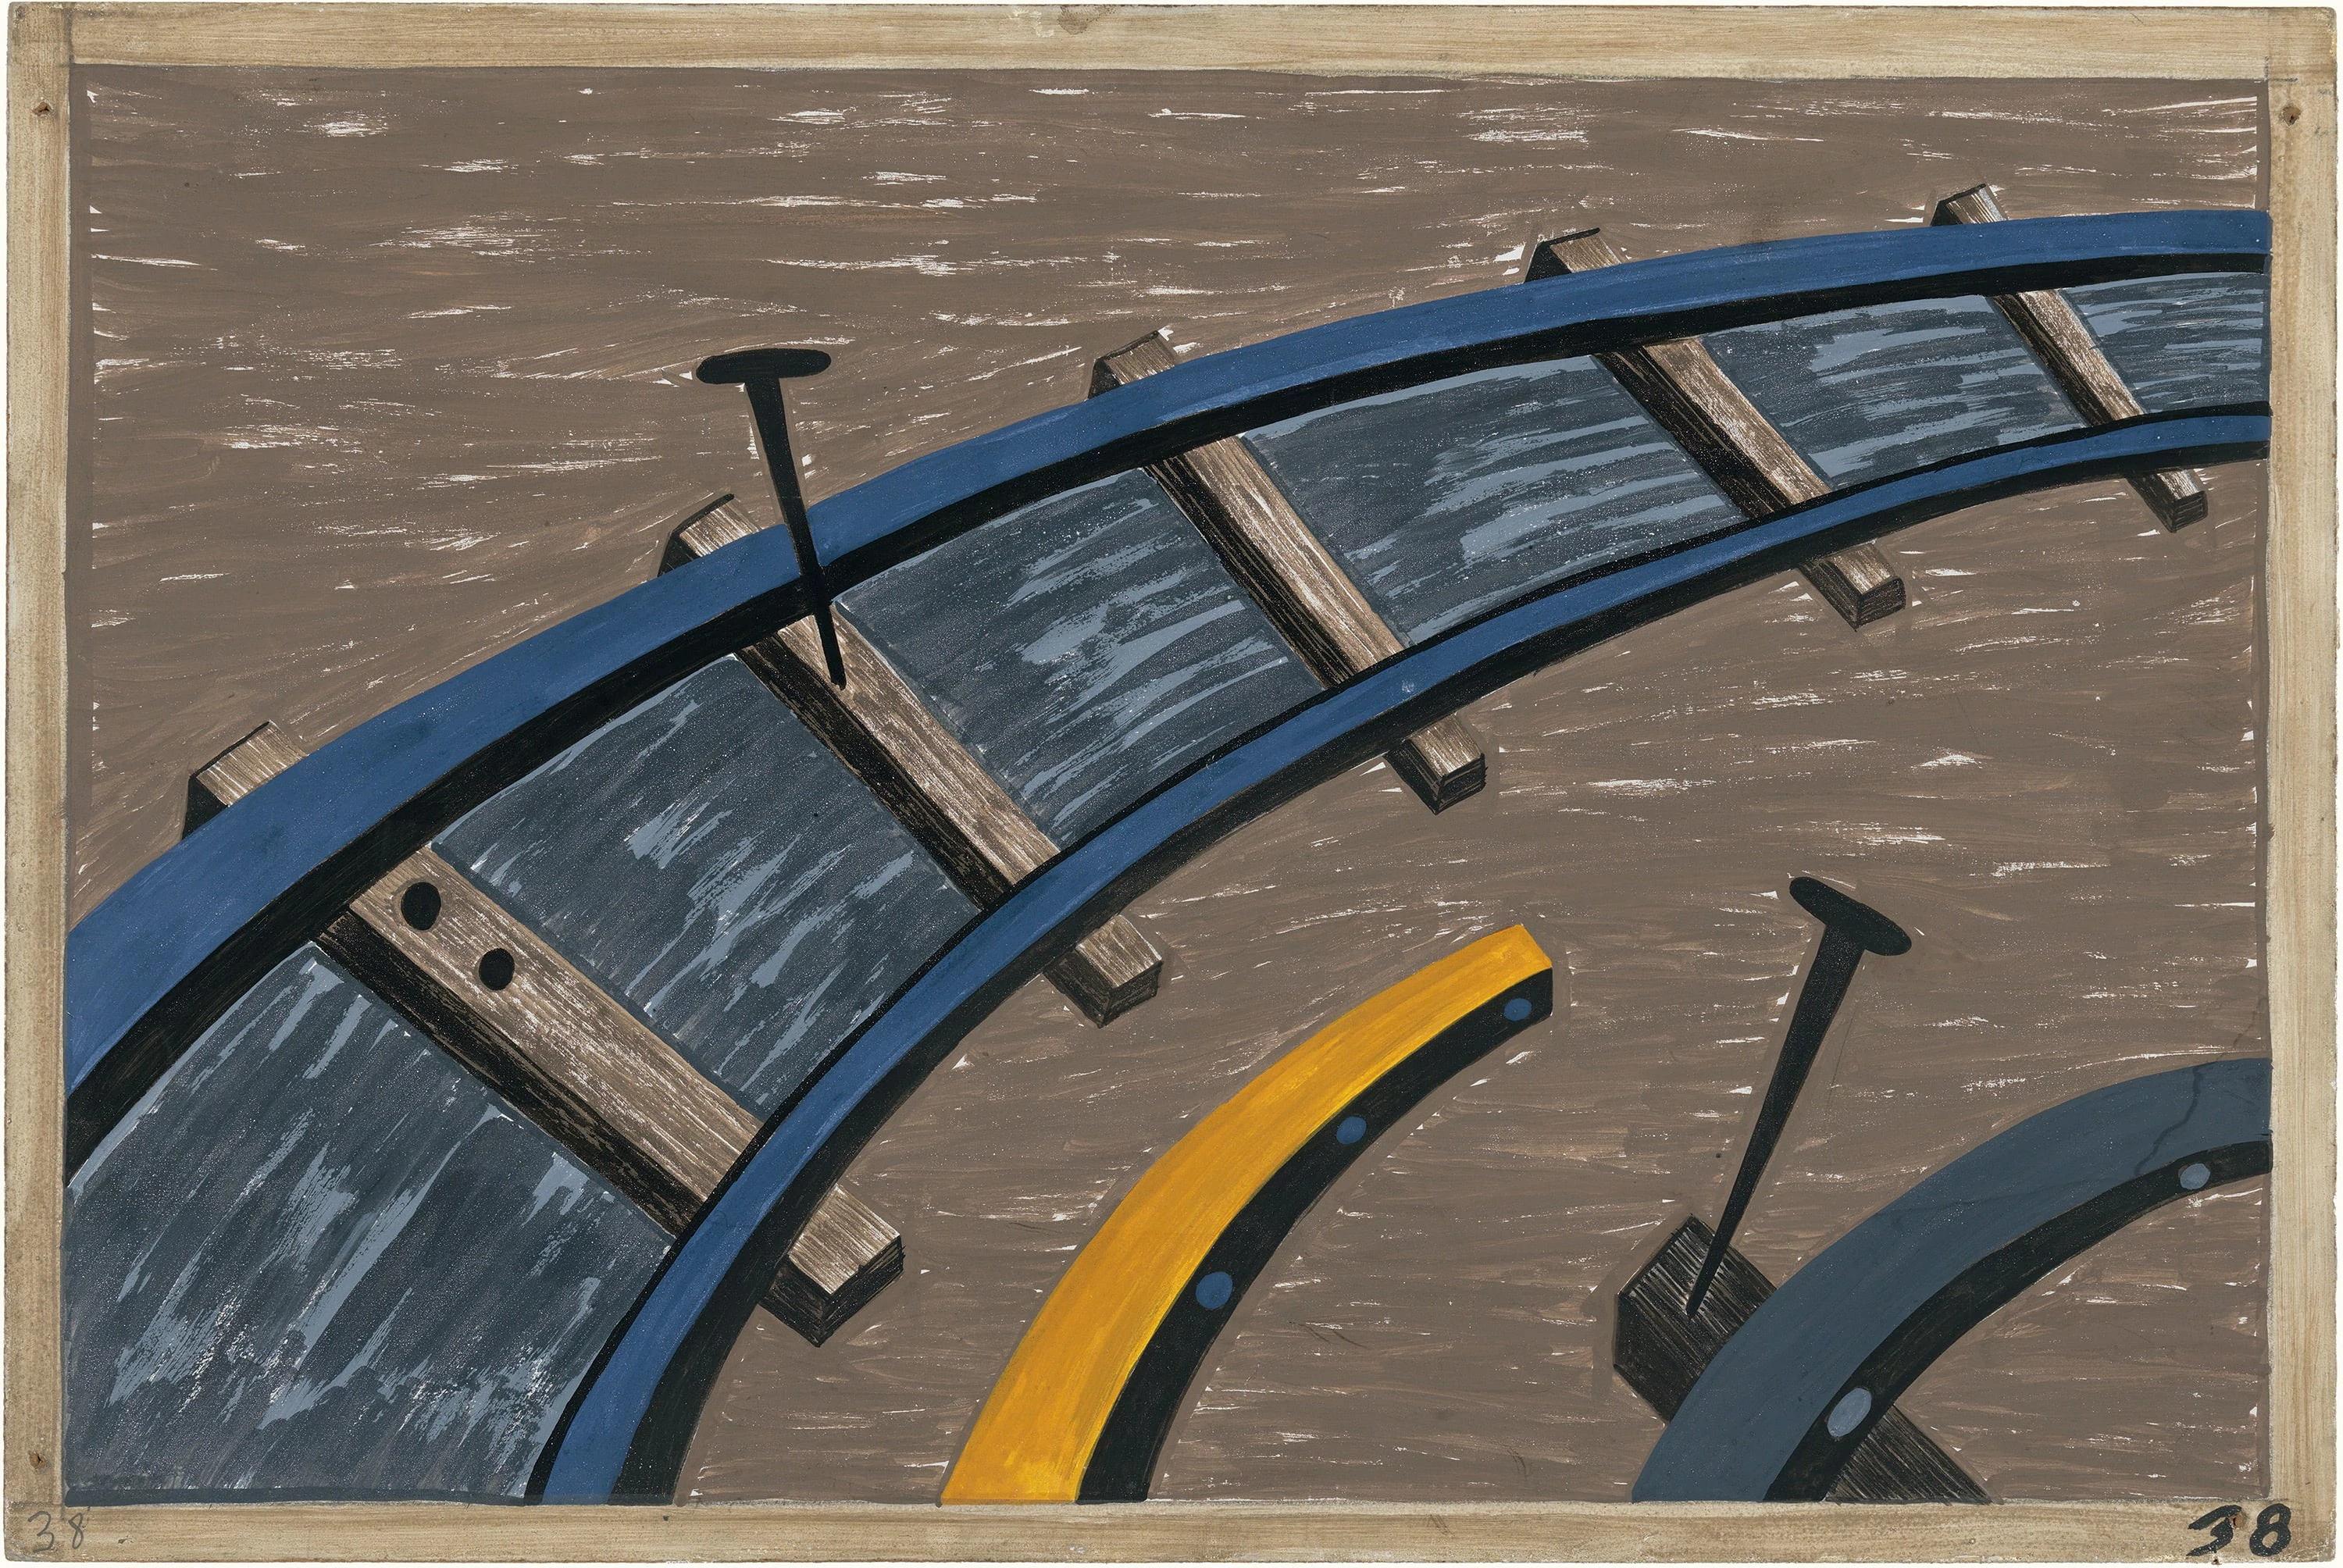 Migration Series No.38: They also worked on the railroads, Jacob Lawrence